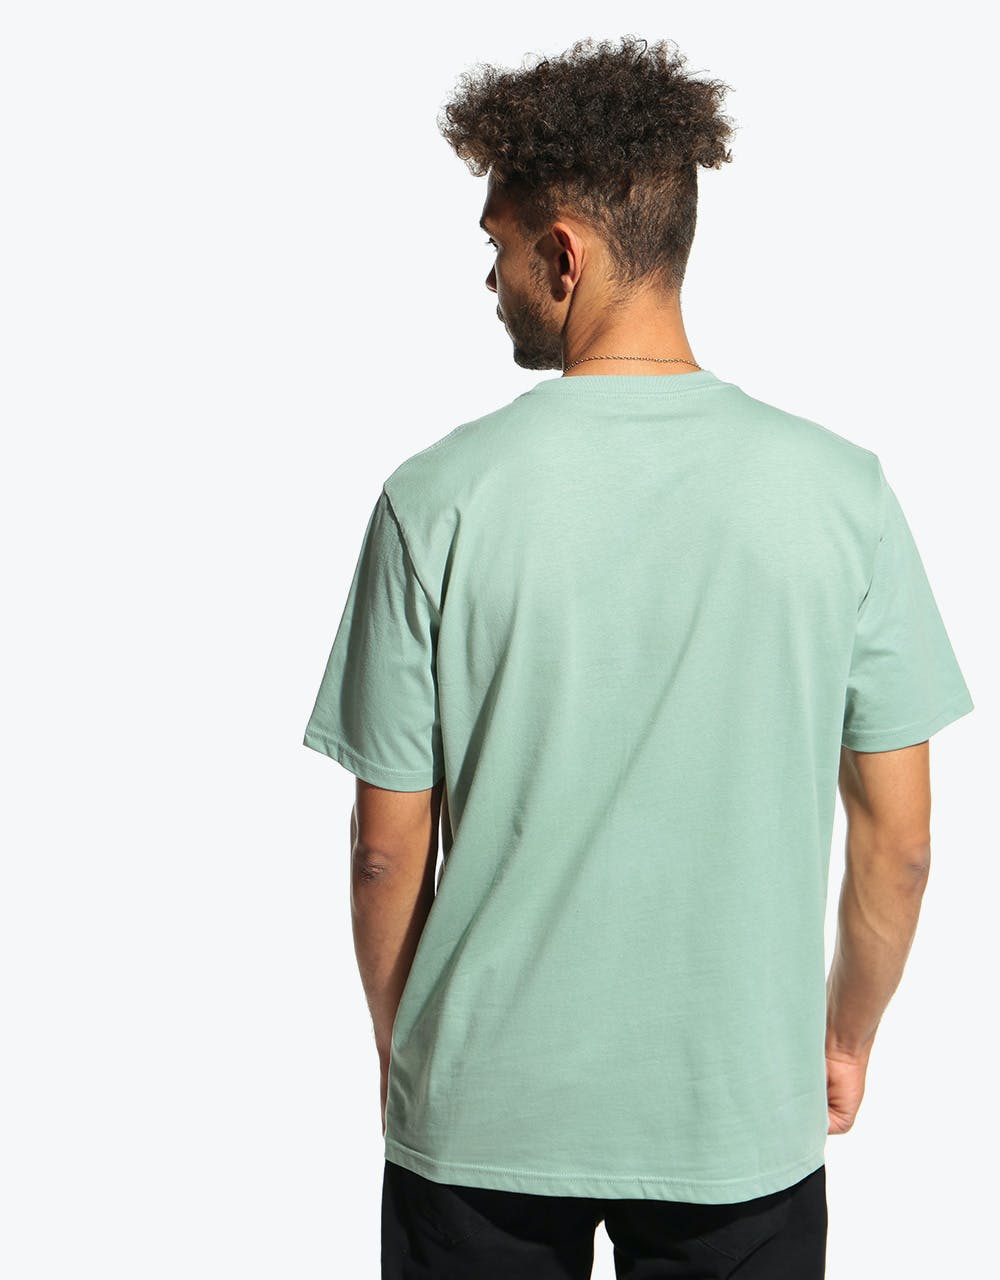 Carhartt WIP S/S Pocket T-Shirt - Frosted Green